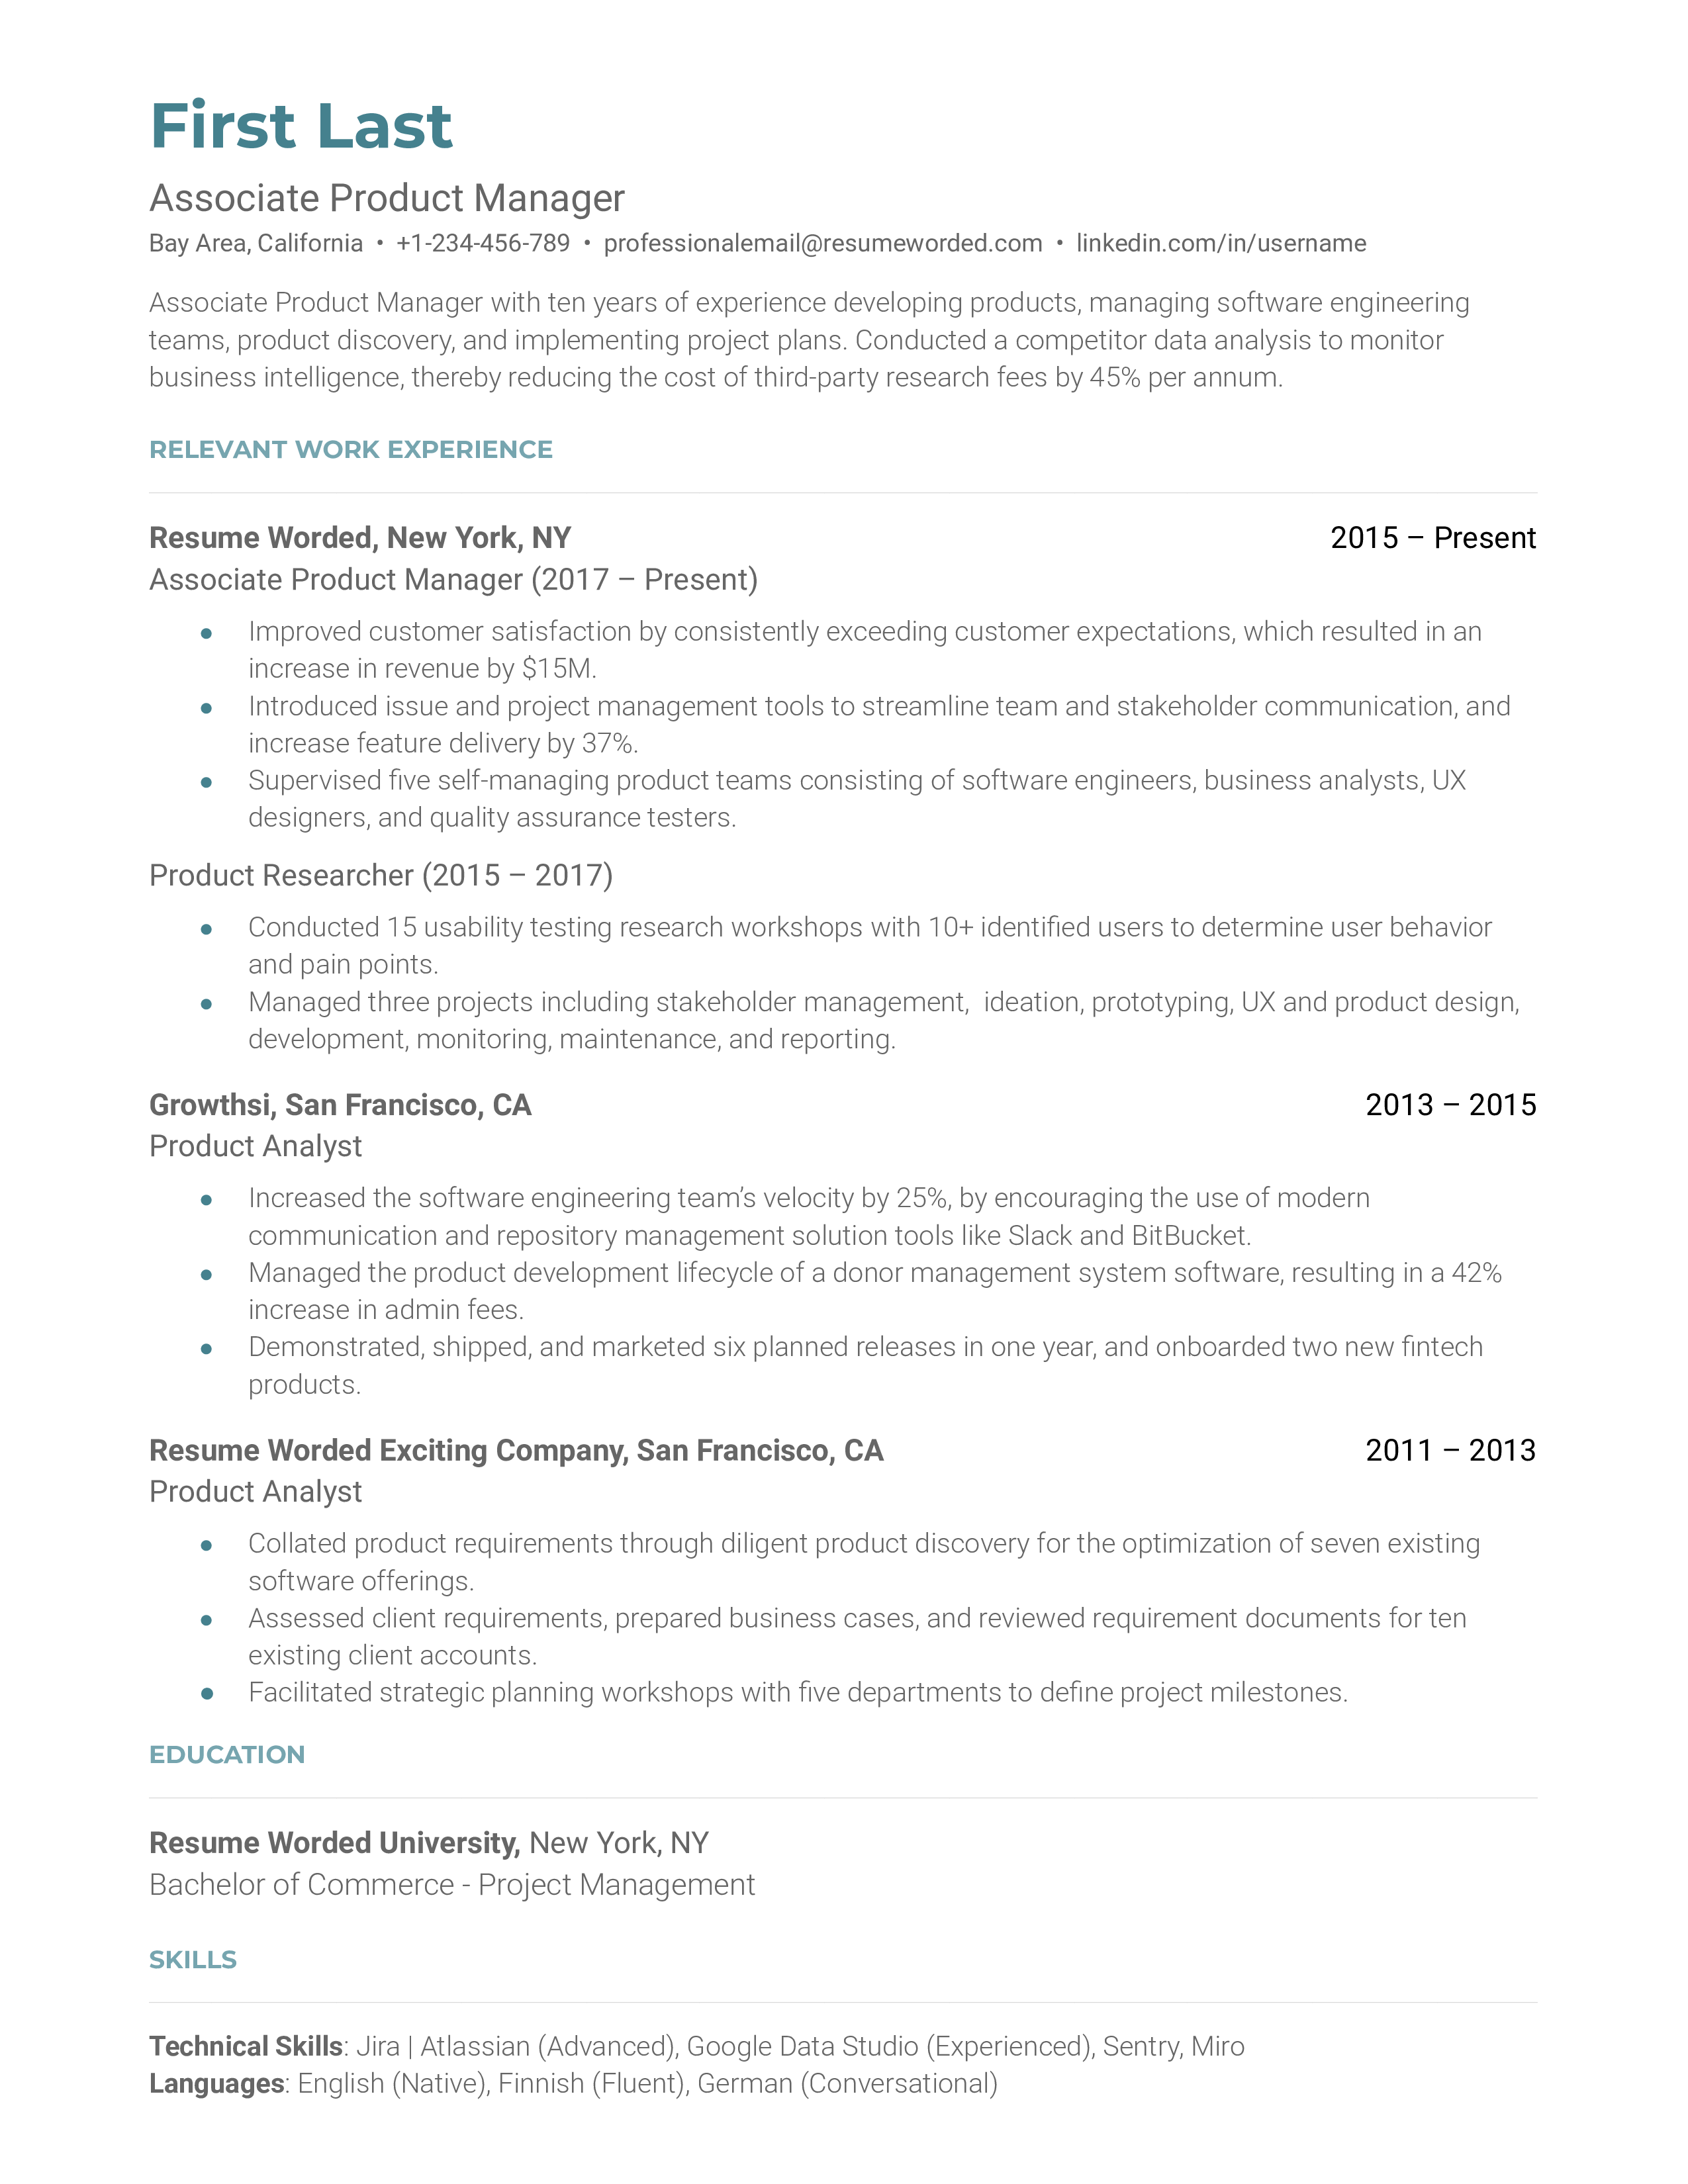 A CV screenshot showcasing skills and experience relevant for an Associate Product Manager role.